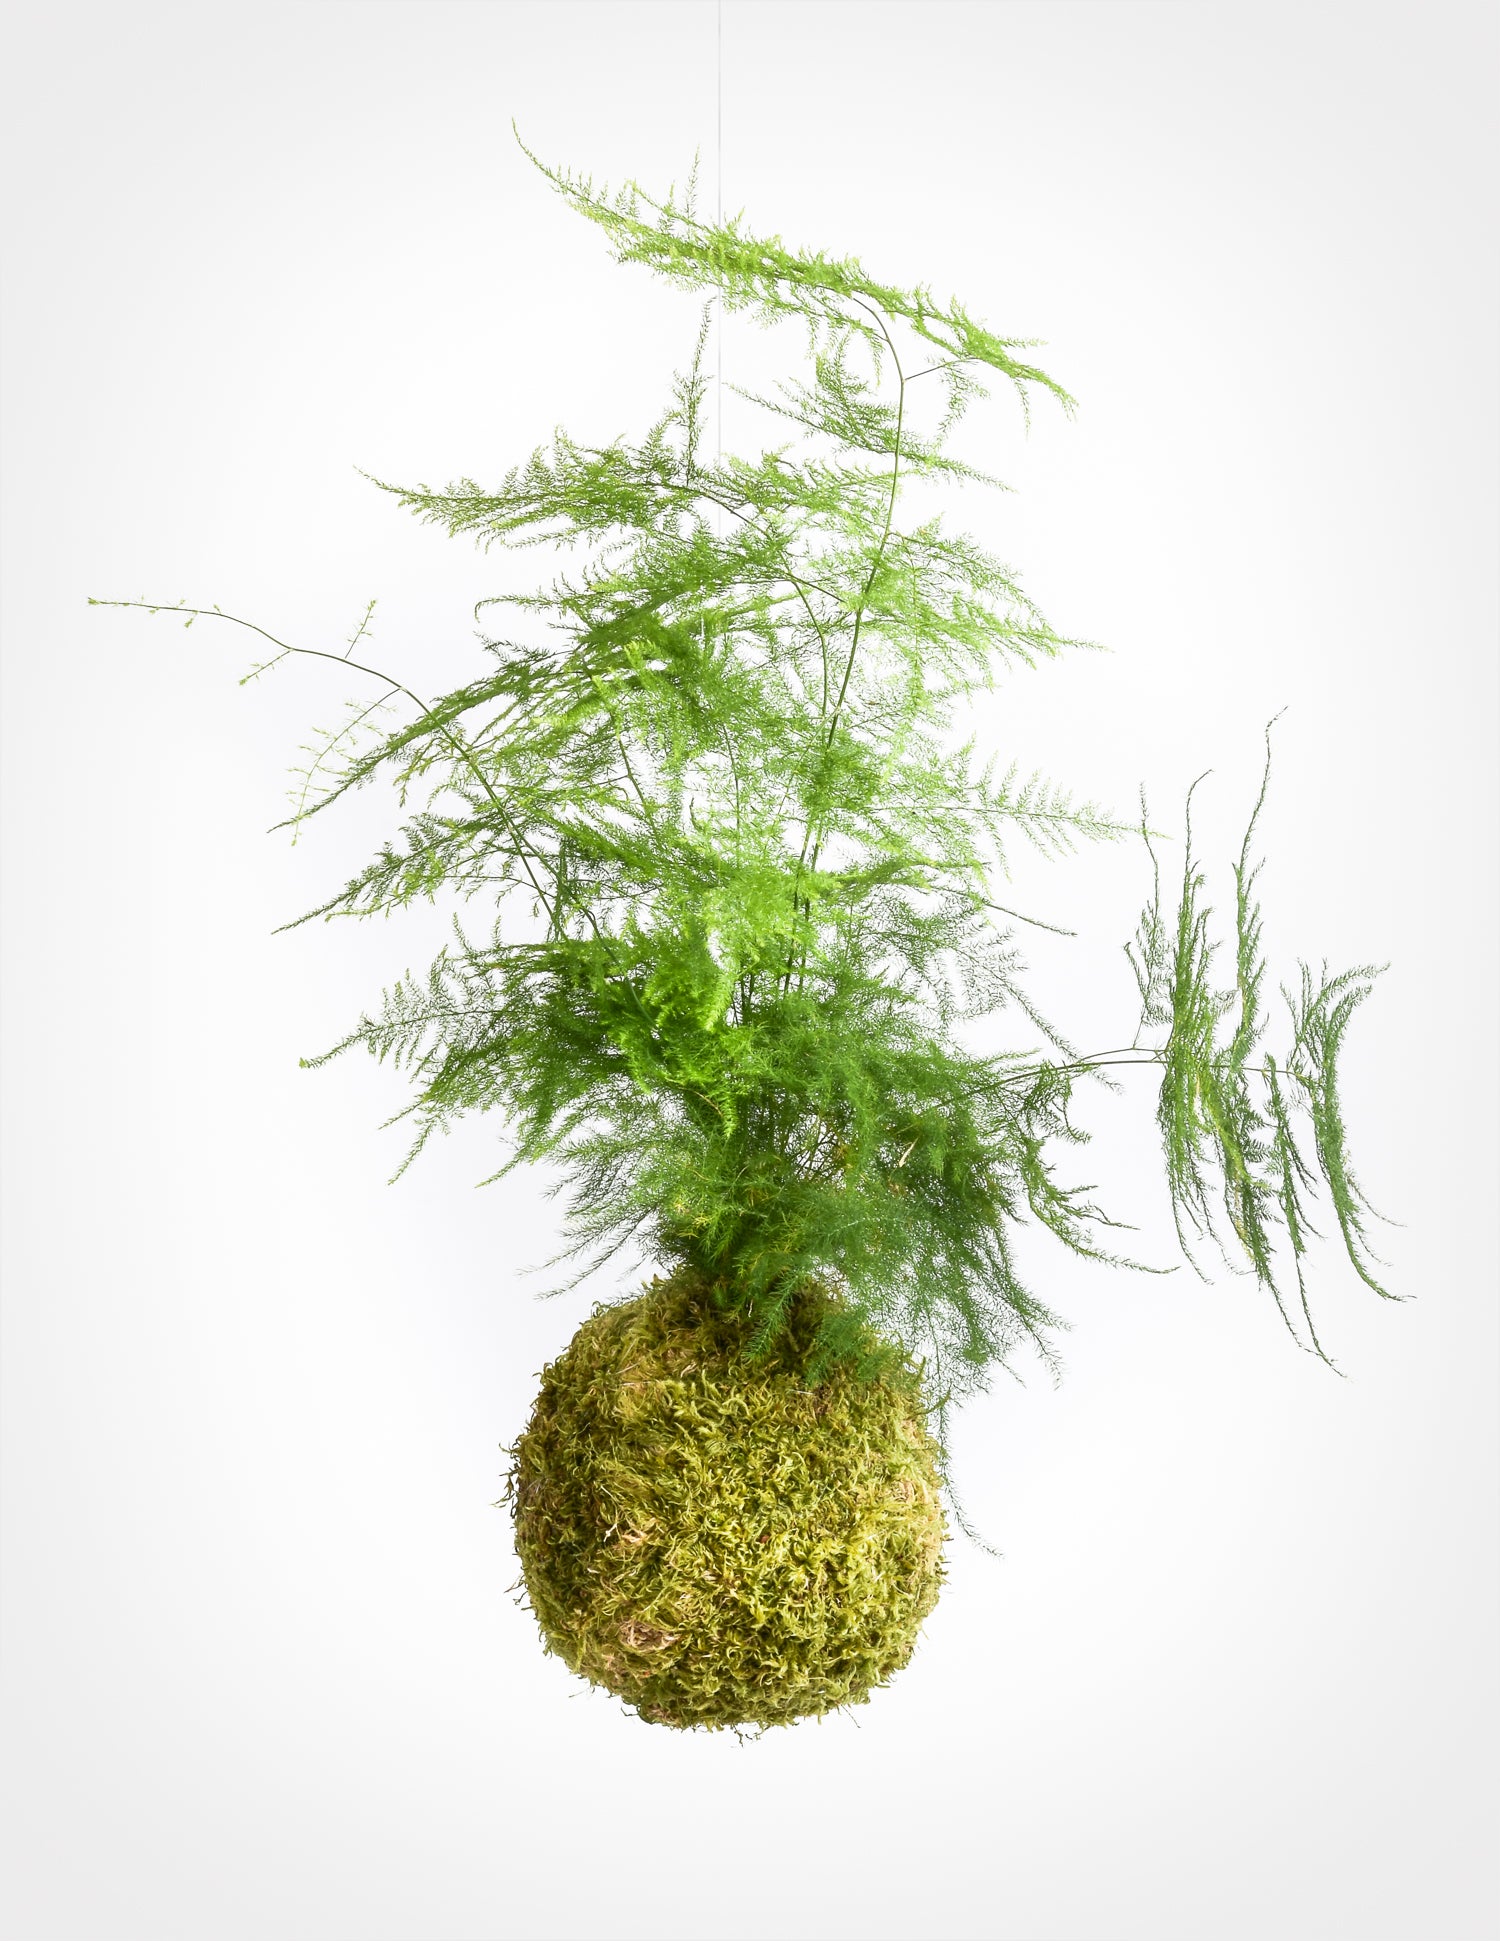 Asparagus plumosus kokedama with moss ball at base and light green lacy foliage cascading up onto white background